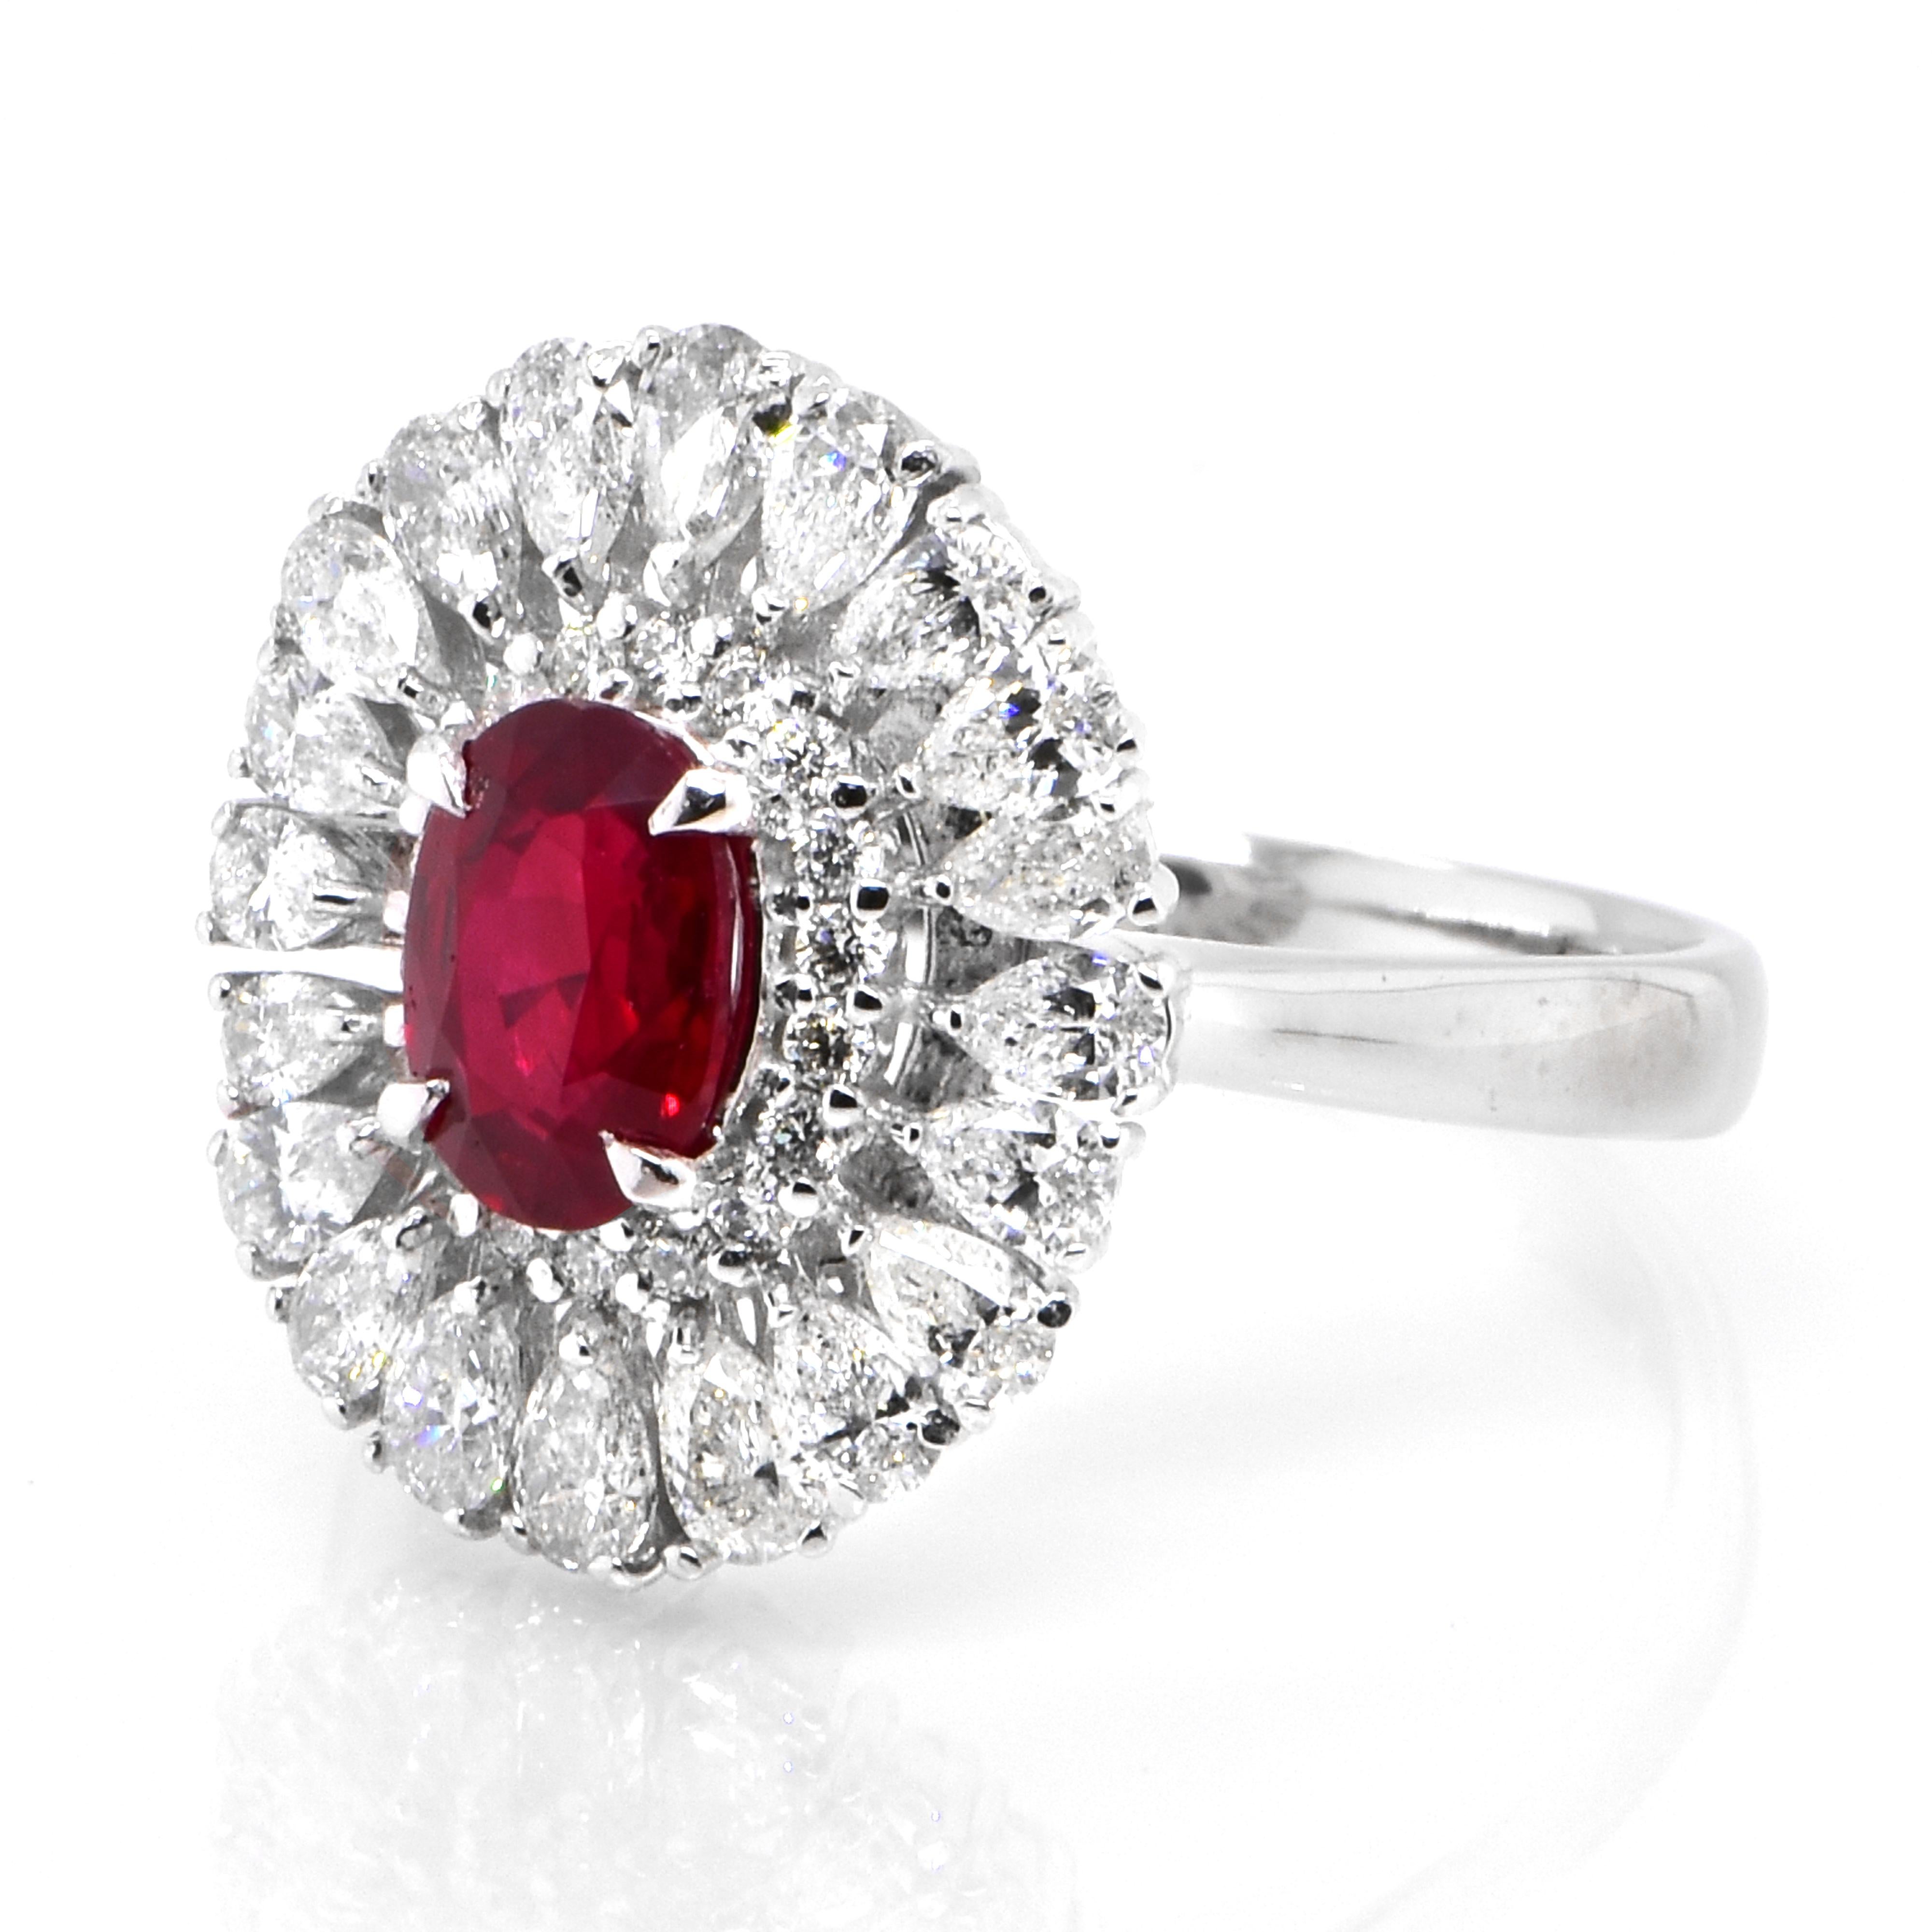 A beautiful Ring set in Platinum featuring a GIA Certified 1.14 Carat Natural, Pigeons Blood Red, Burmese Ruby and 1.16 Carat Diamonds. Rubies are referred to as 